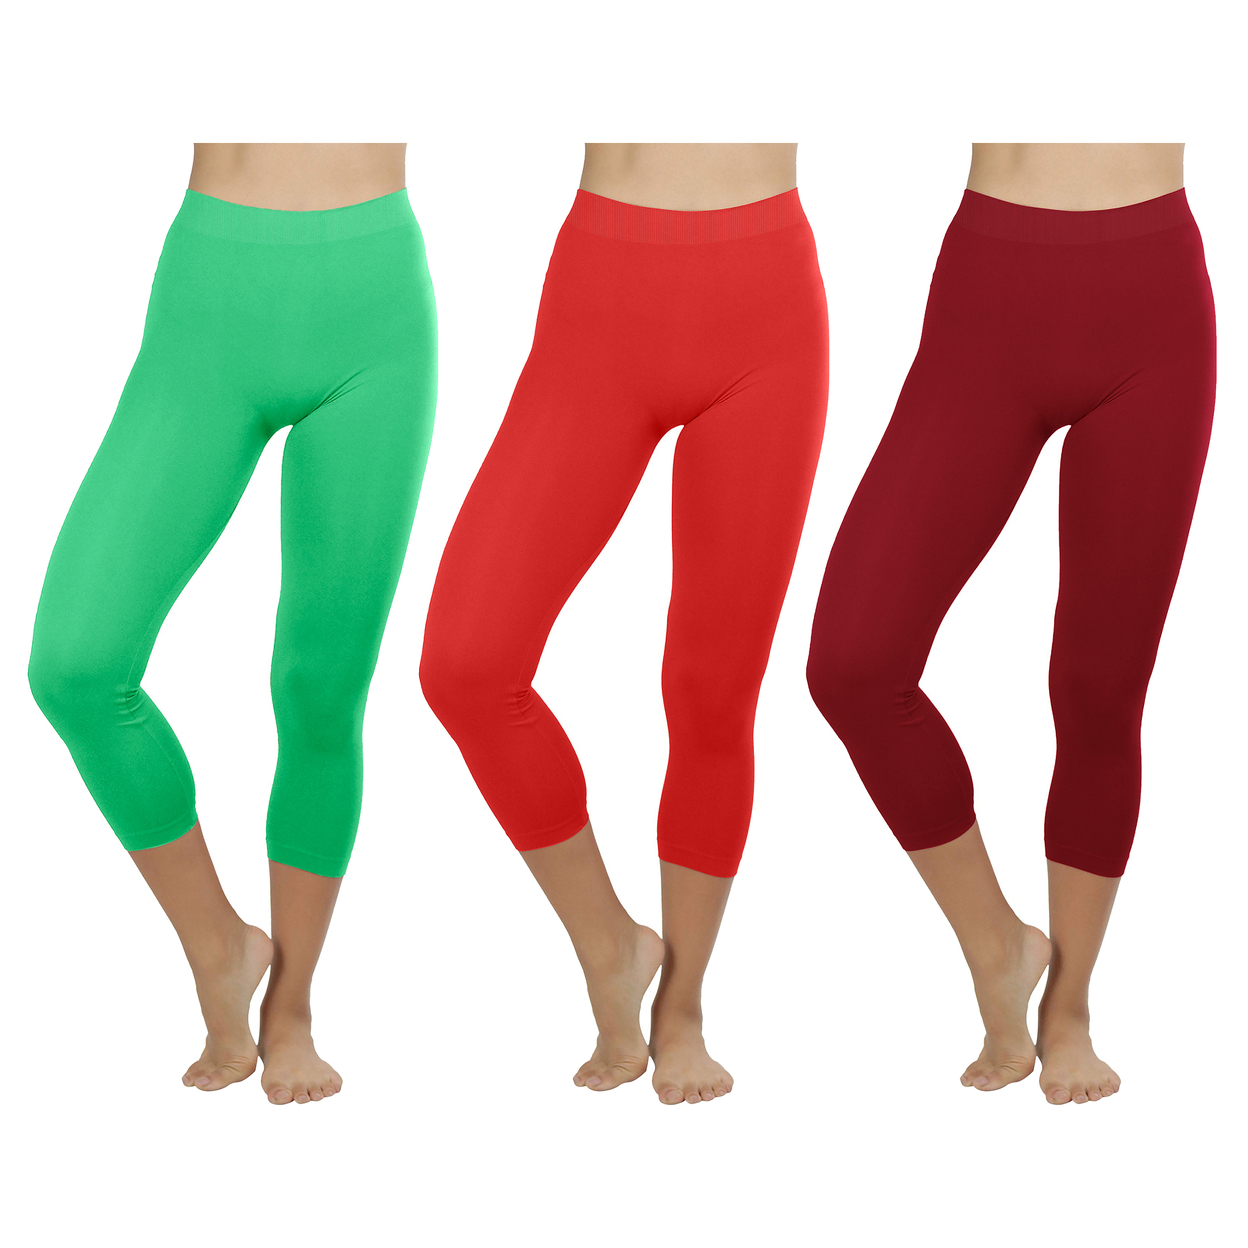 2-Pack: Women's Ultra-Soft High Waisted Smooth Stretch Active Yoga Capri Leggings - Burgundy & Red, Small